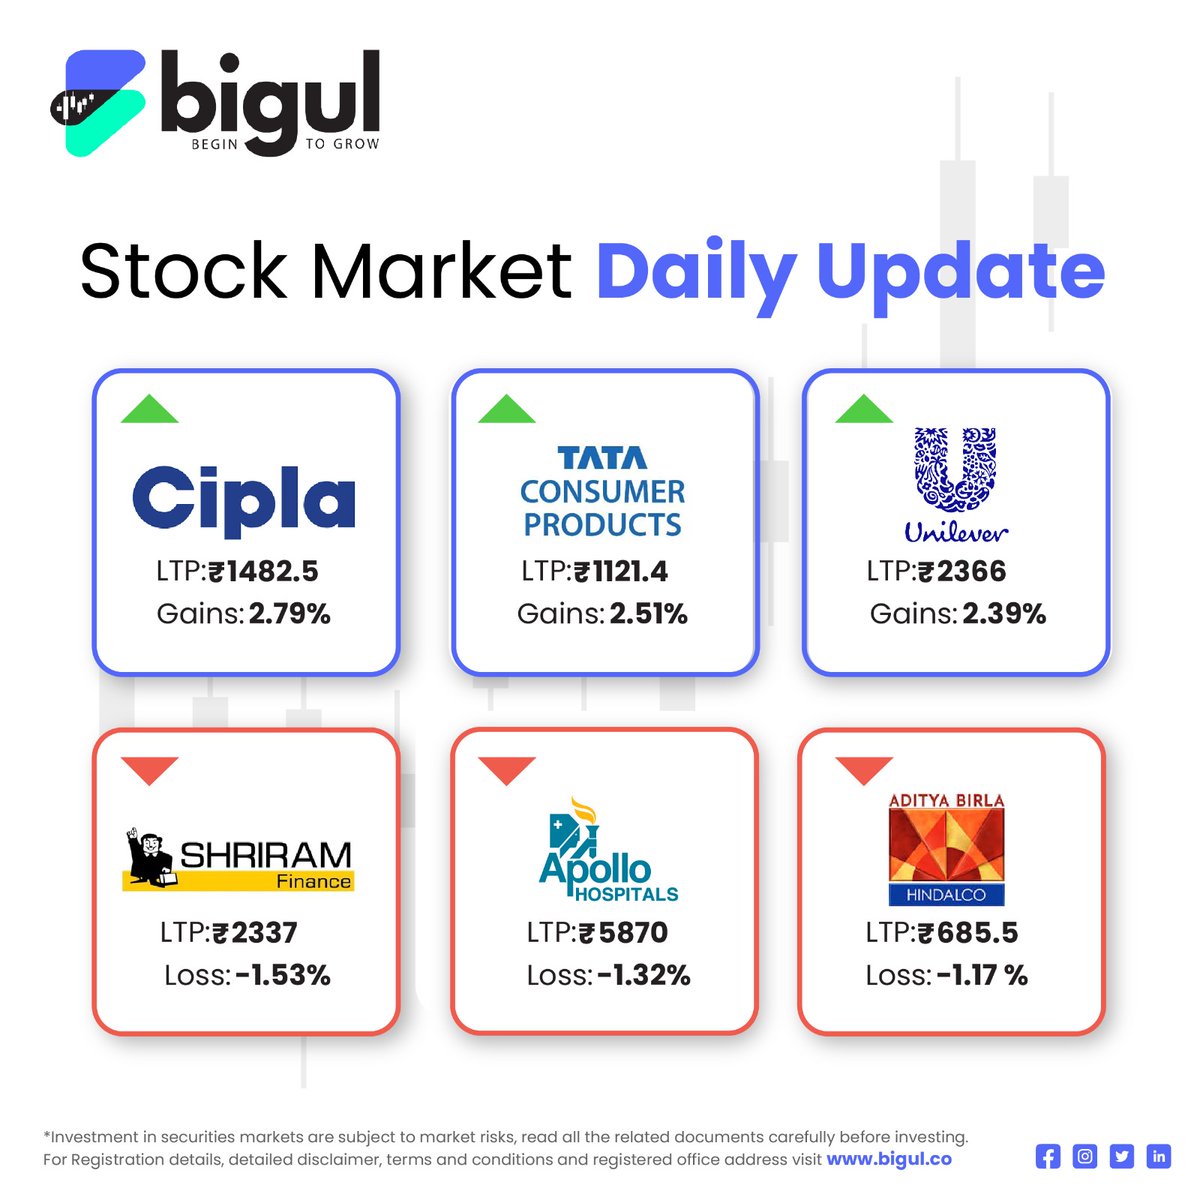 Check out the Nifty Top Gainers and Losers of the Day! #Cipla, #tataconsumer, #Shriramfinance, #Apollohospital. #bigul #bigultrading #Topgainers #TopLosers #nse #bse #stockmarketindia